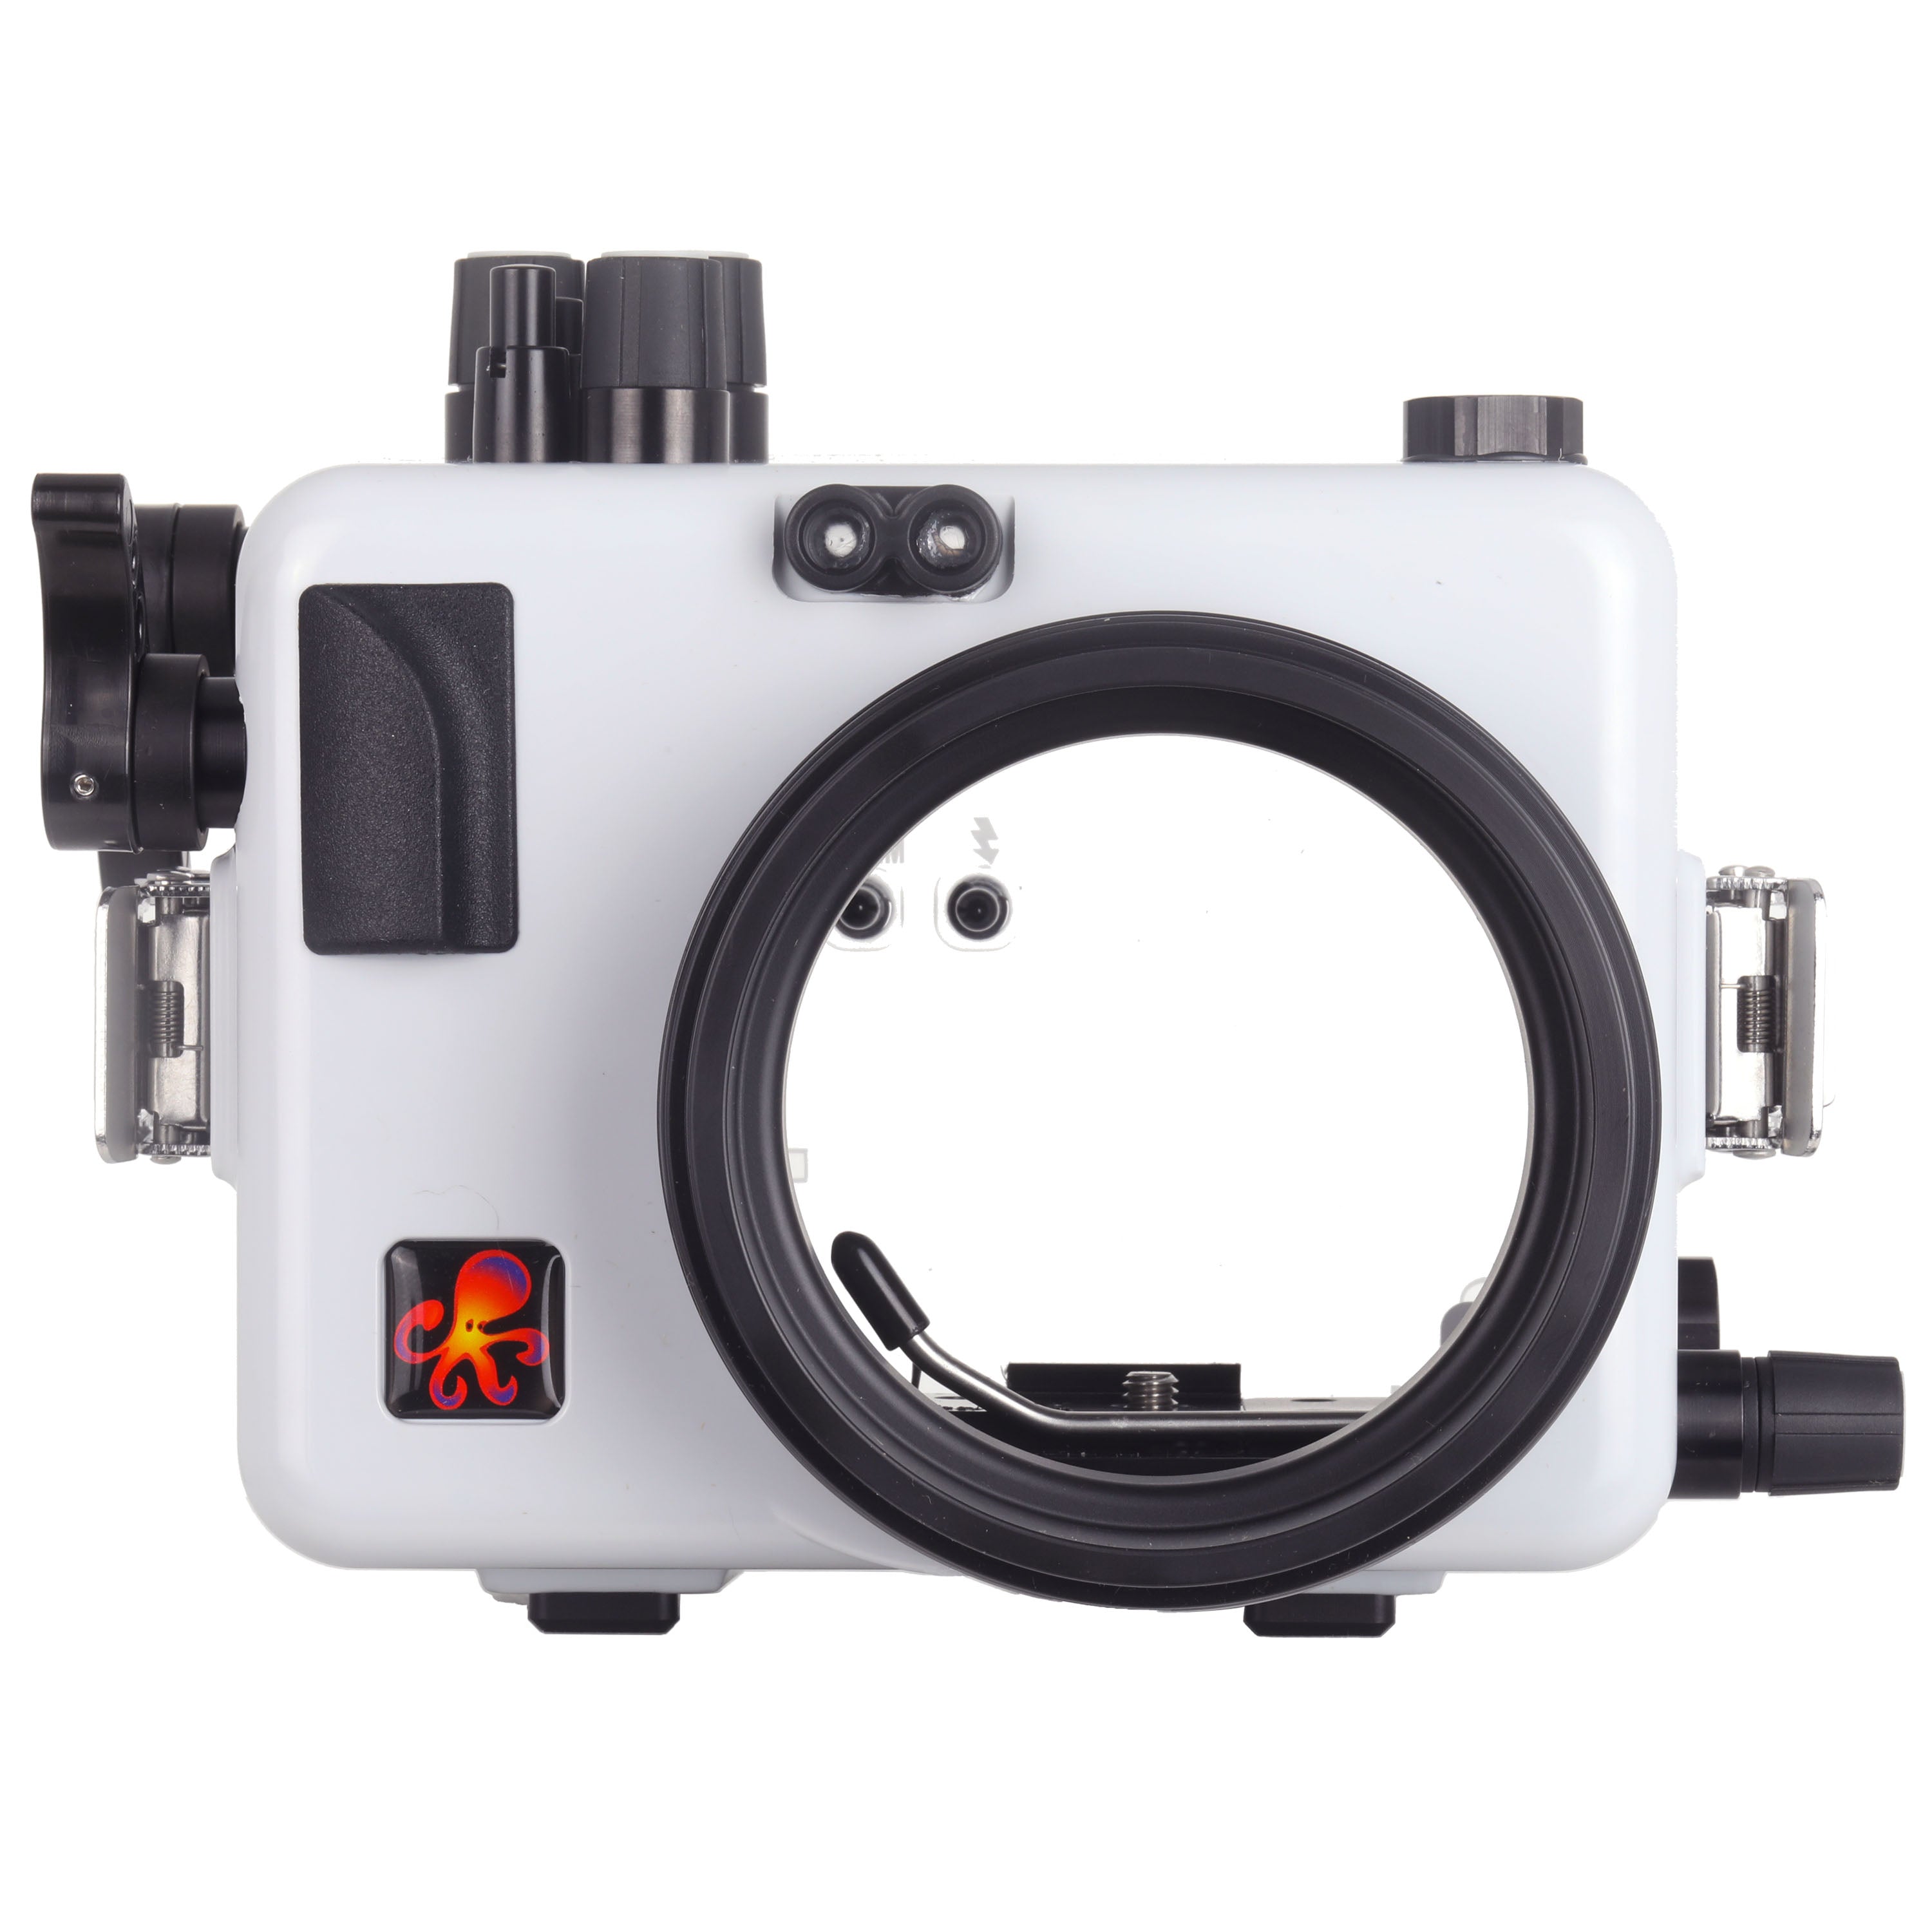 200DLM/A Underwater Housing for Sony Alpha a6100, a6300, a6400, a6500